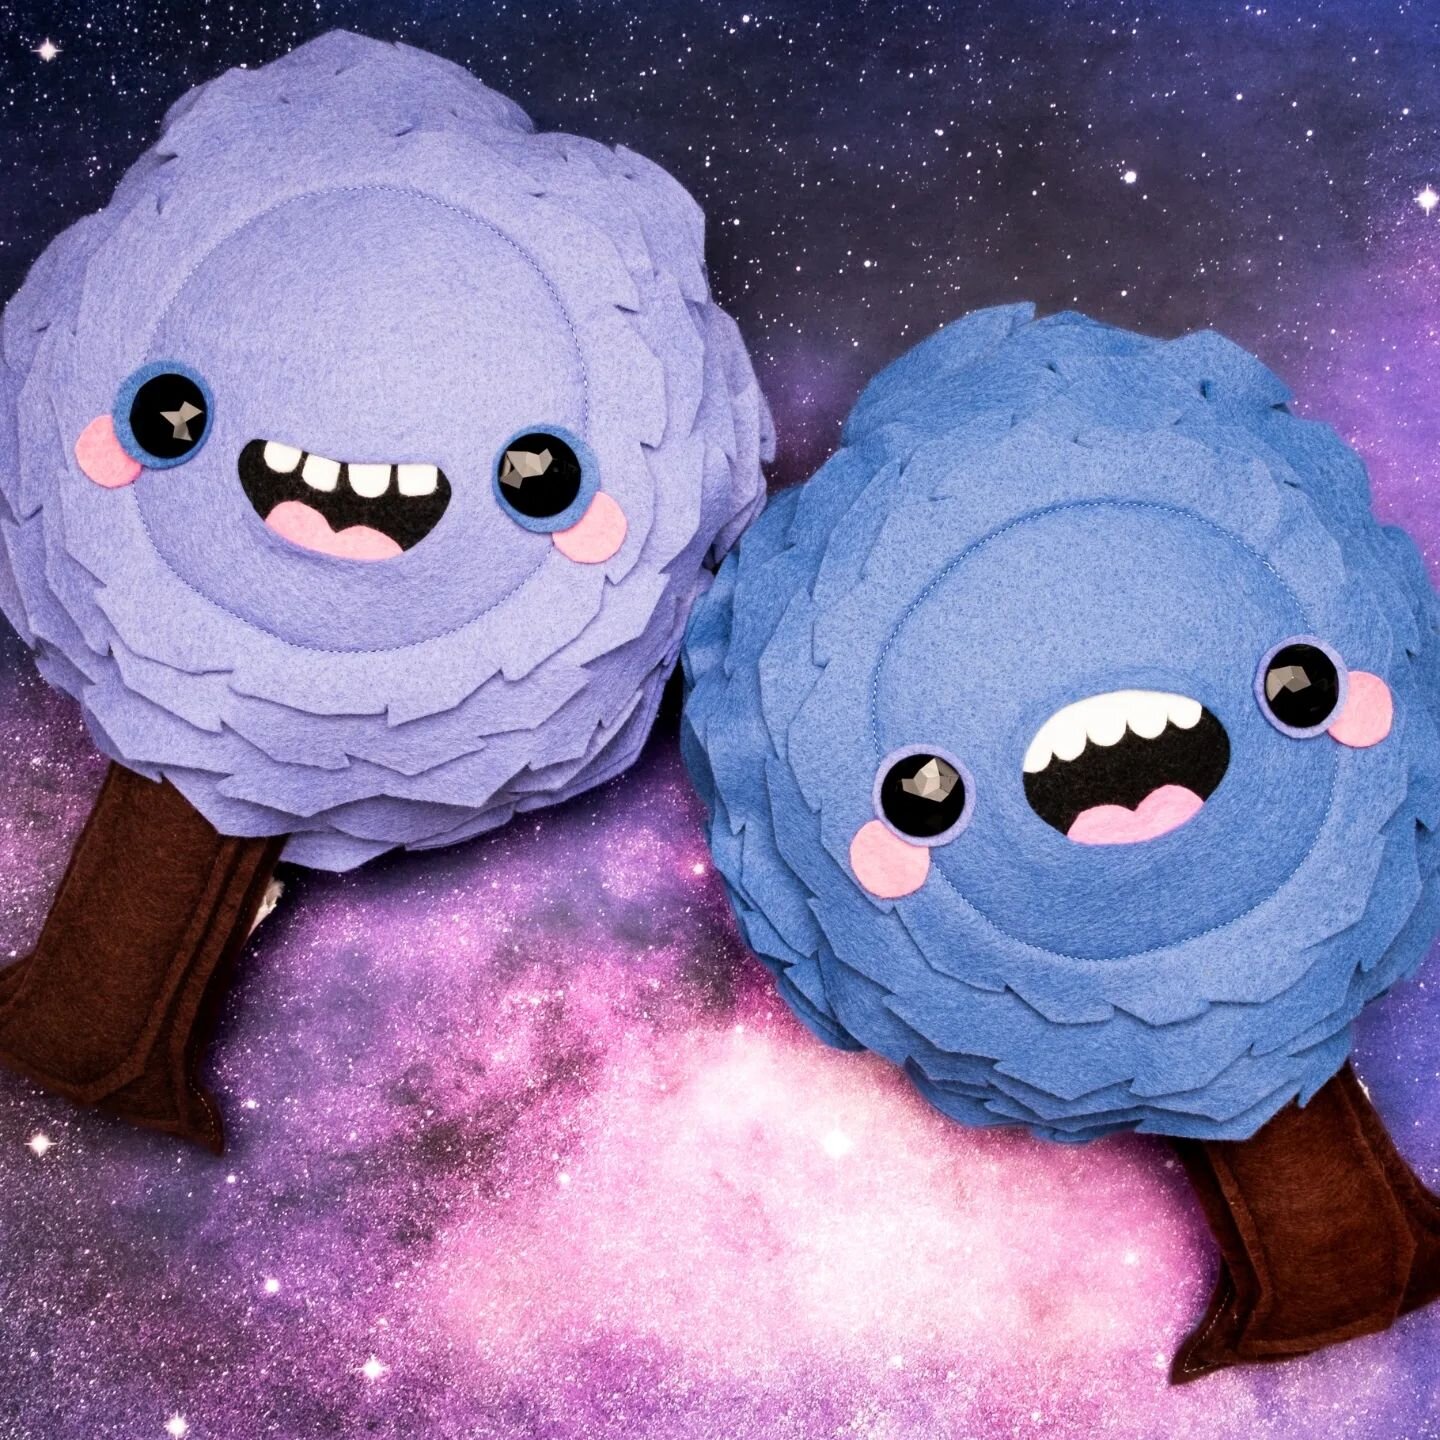 These XL Maple plush toy guys have been listed in the shop! Here they are pictured going on a space exploration. They thought they could take thier oxygen making super powers into space to try to &quot;make space habitable&quot; but, well... They are